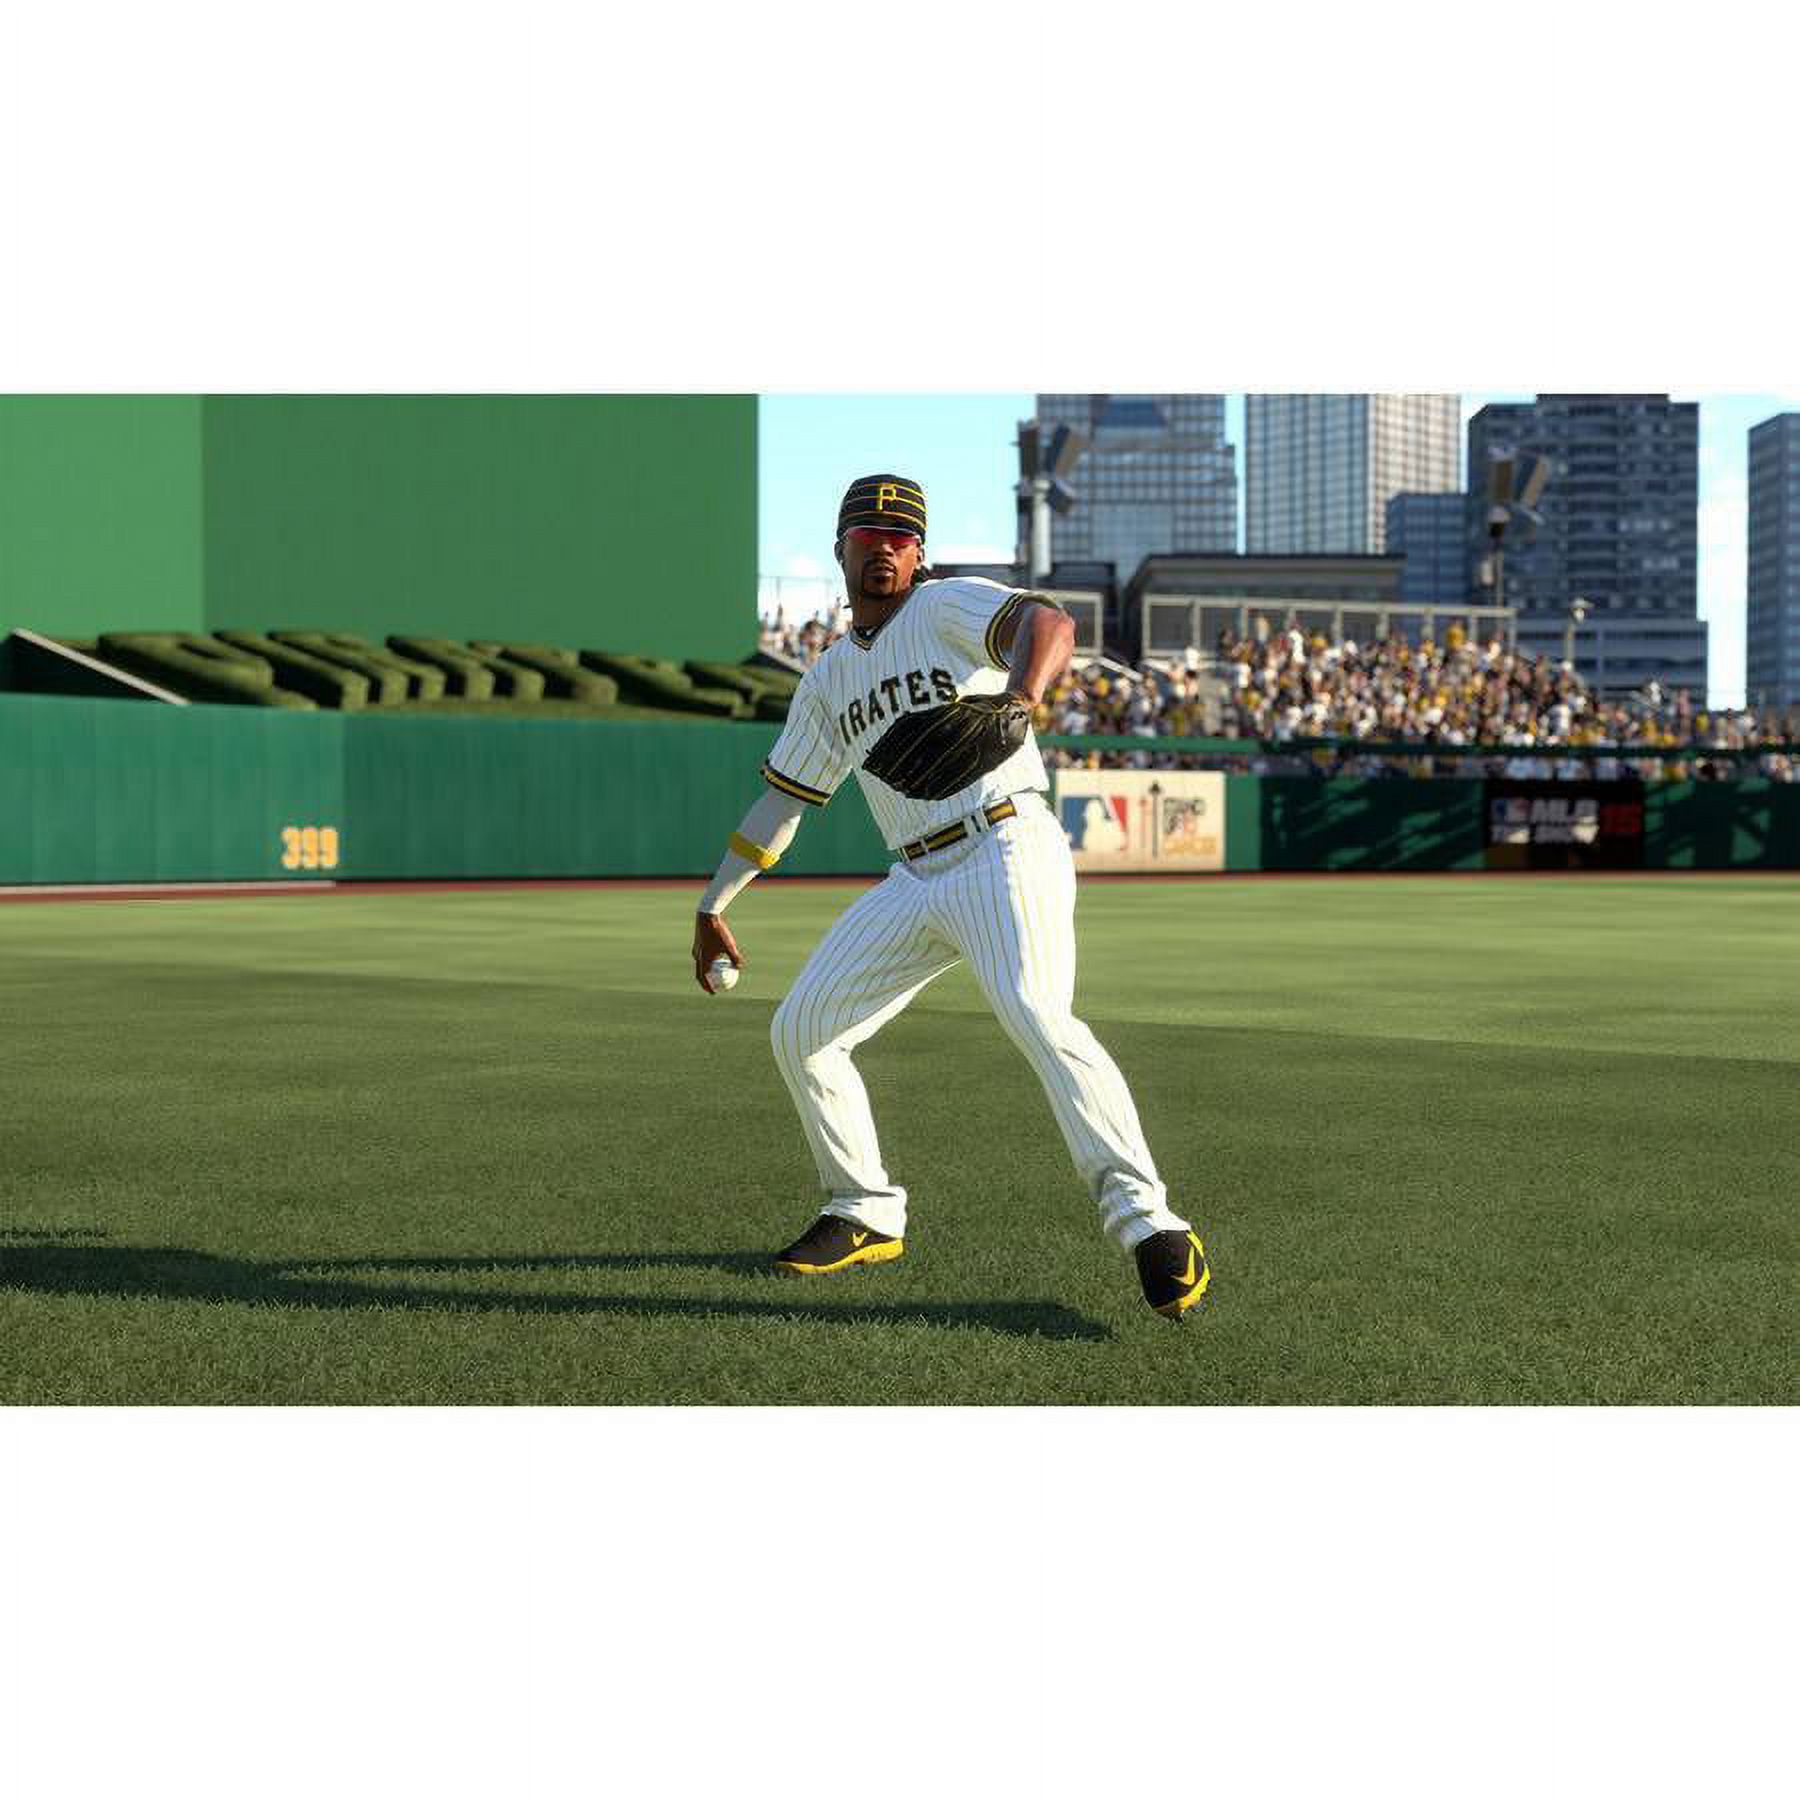 Sony MLB 15: The Show (PS4) - Video Game - image 2 of 5